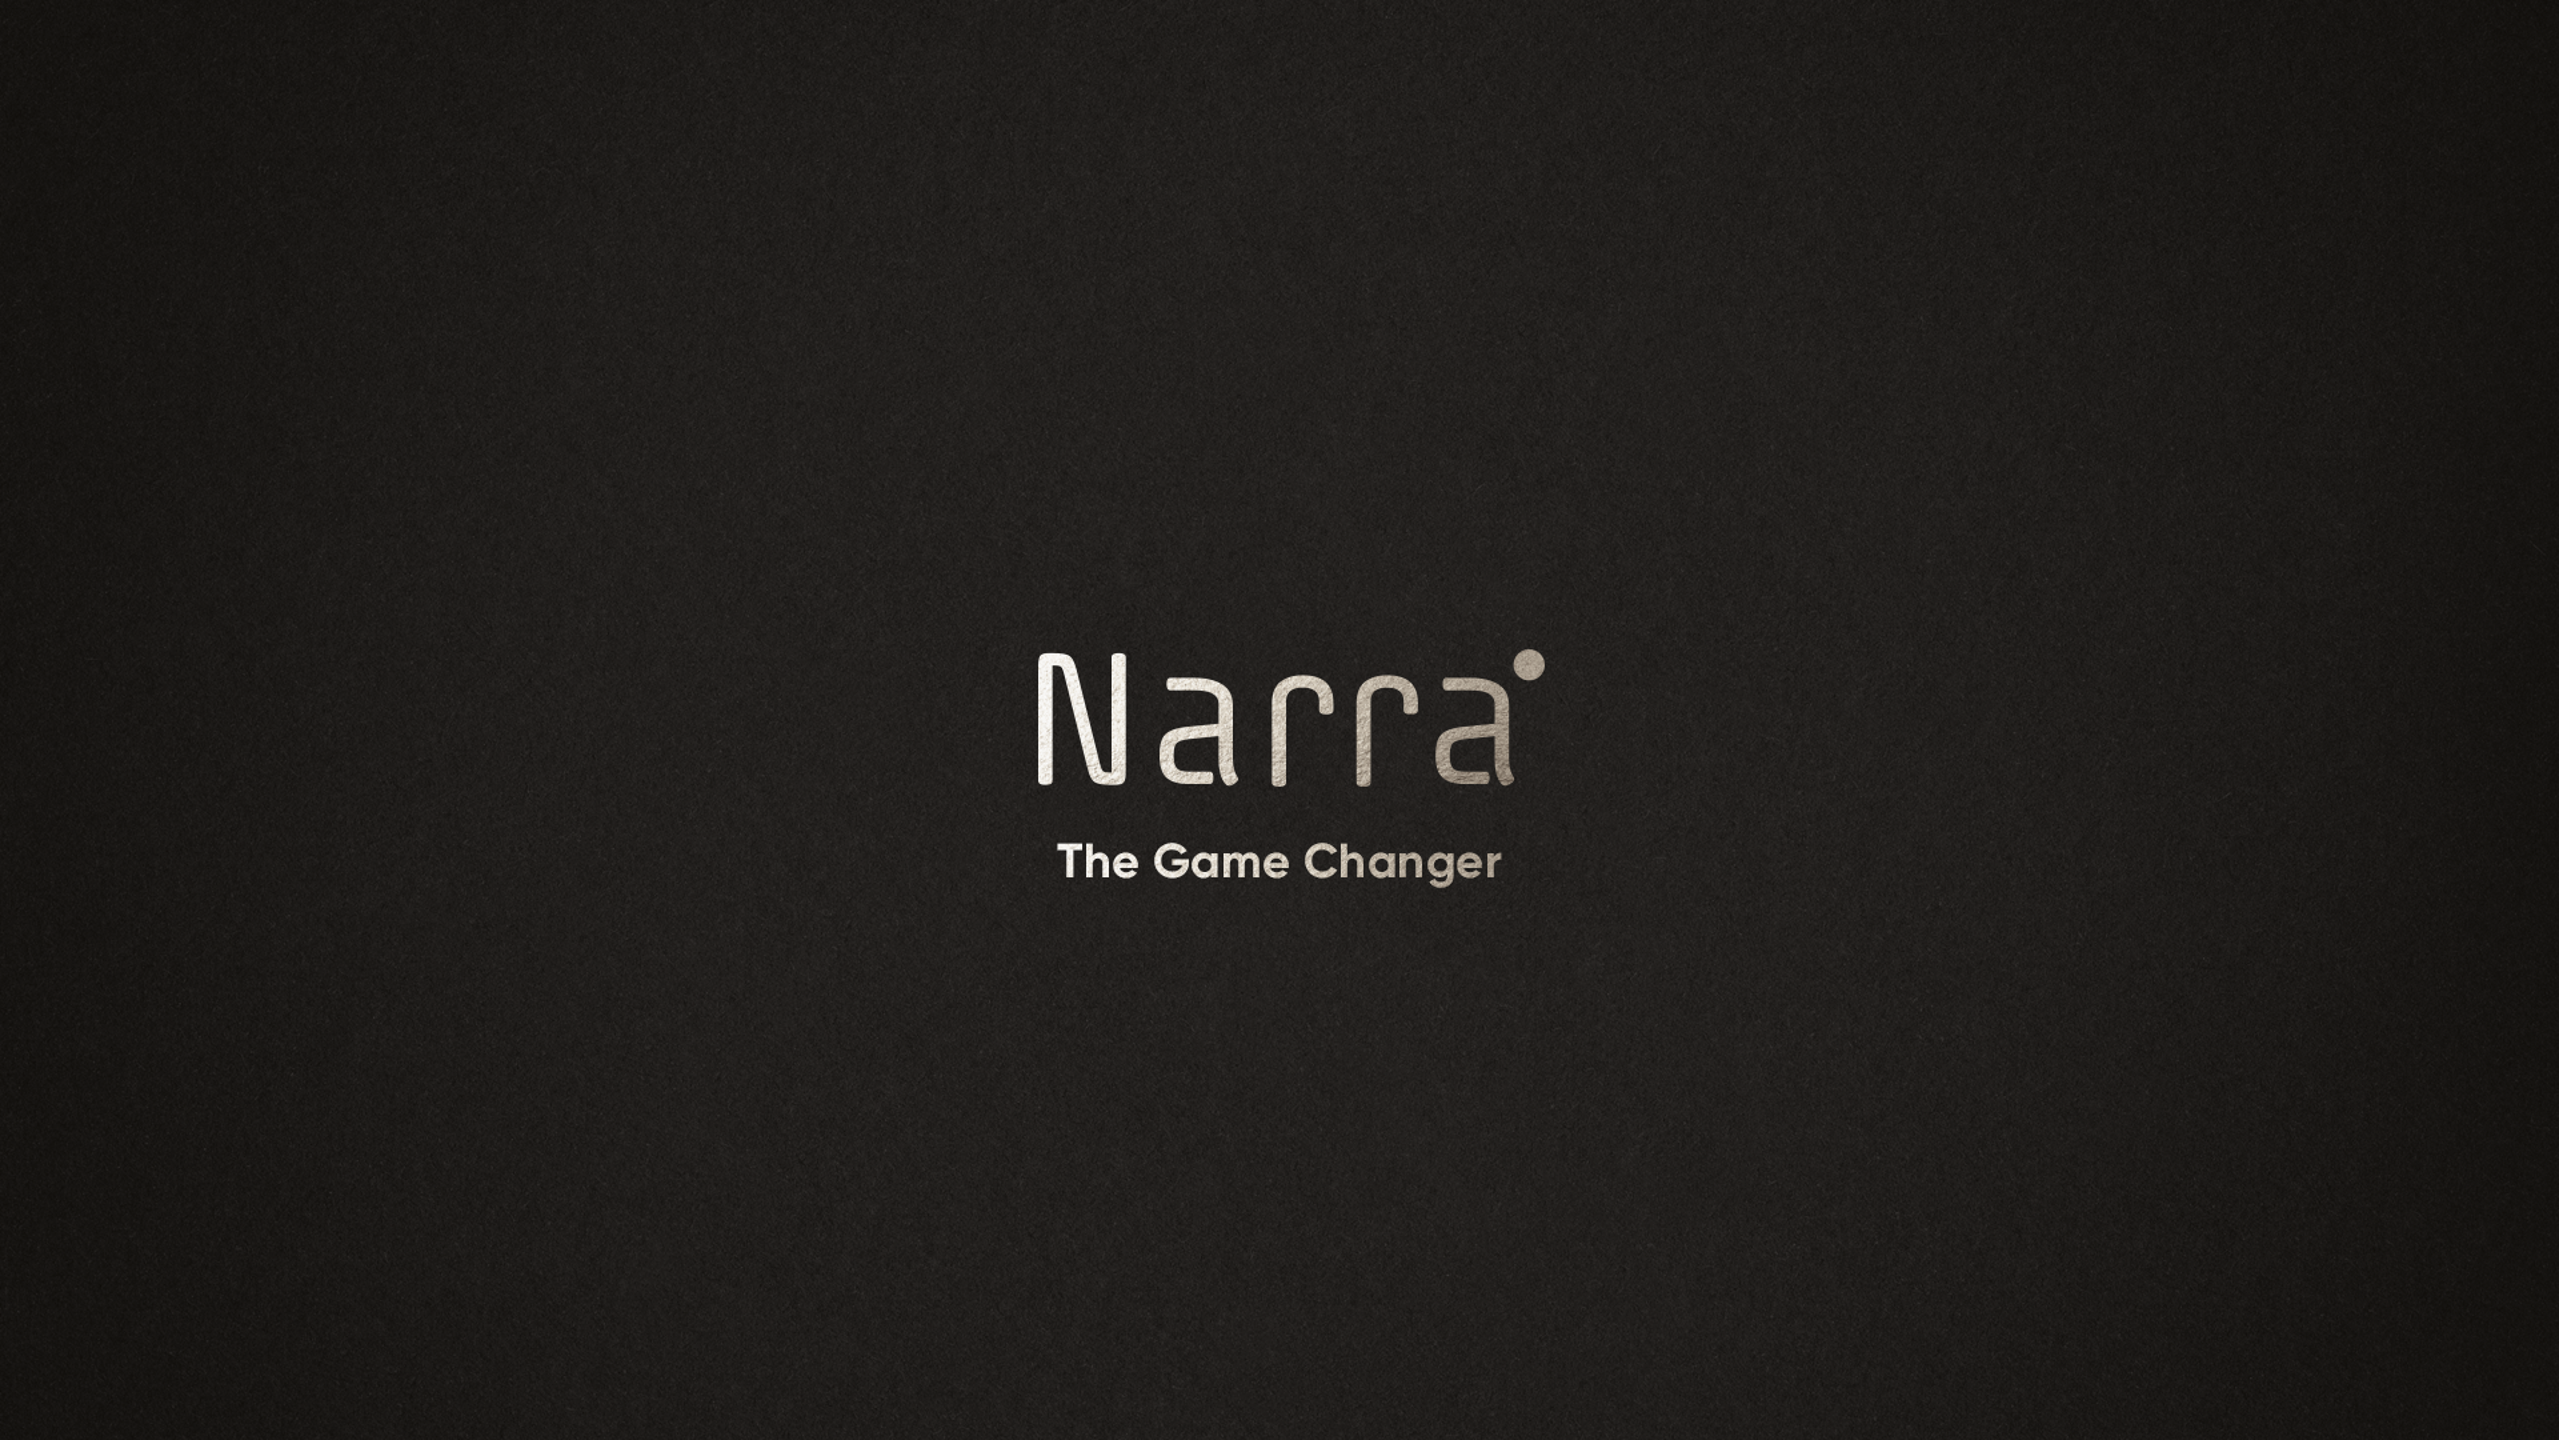 Create Your Story with Narra - Workshop for Narrative Designers